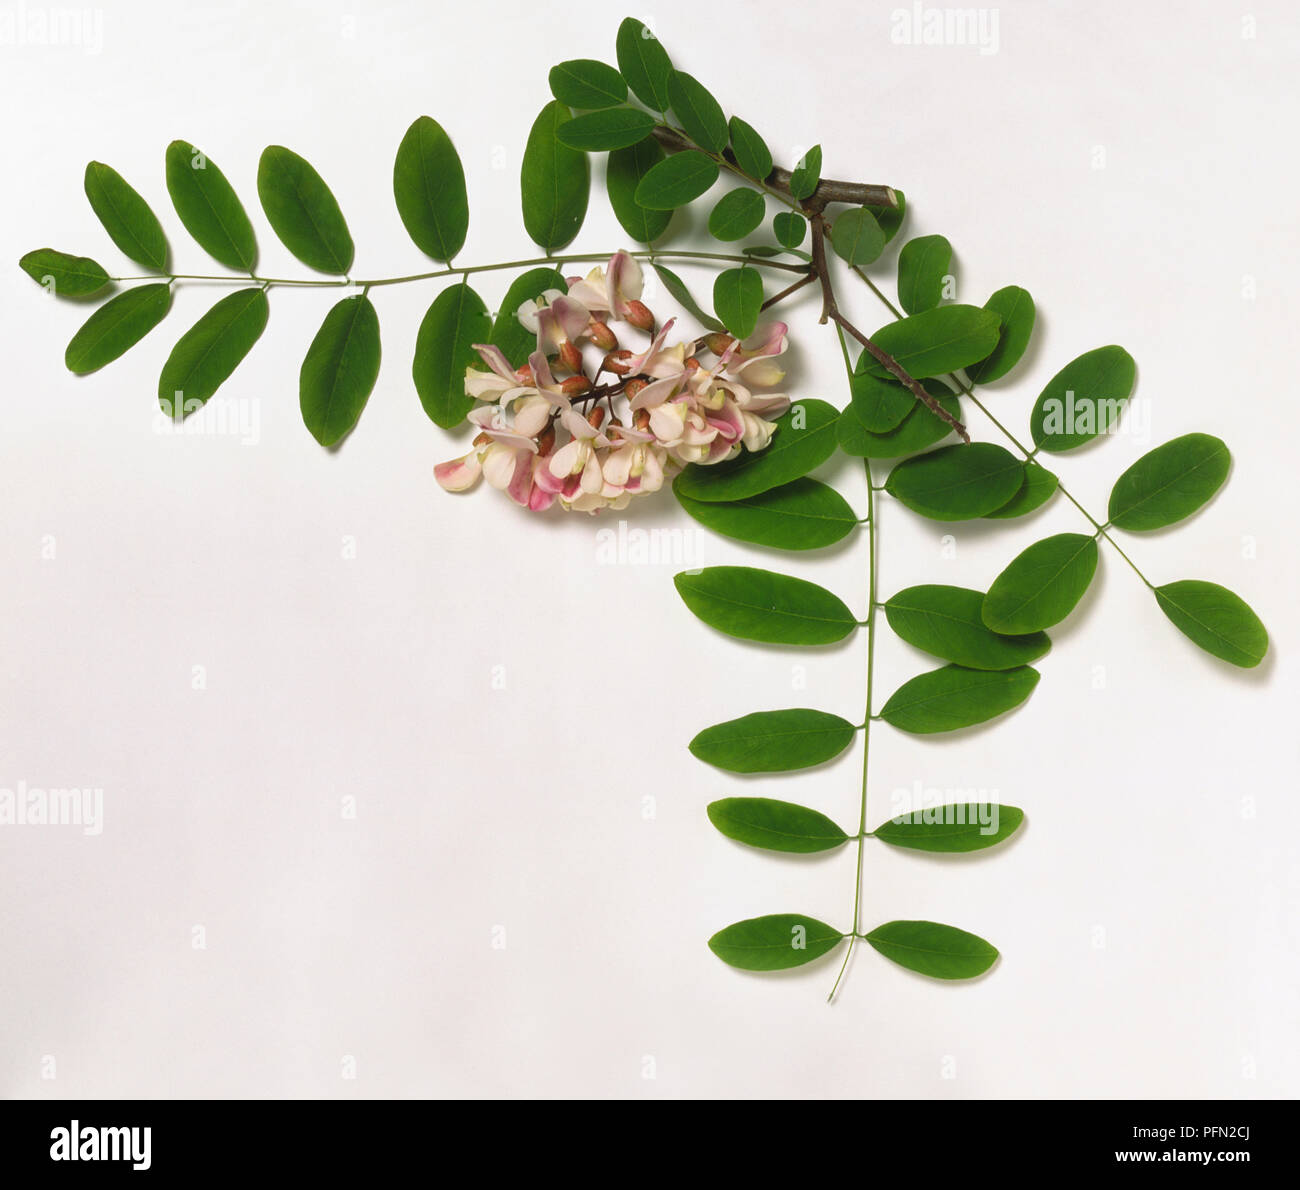 Leguminosae, Robinia x holdtii, grey-brown branch tip, pinnate, oblong leaflets arranged oppositely, and pea-like, purplish-pink flowers borne in hanging cluster. Stock Photo